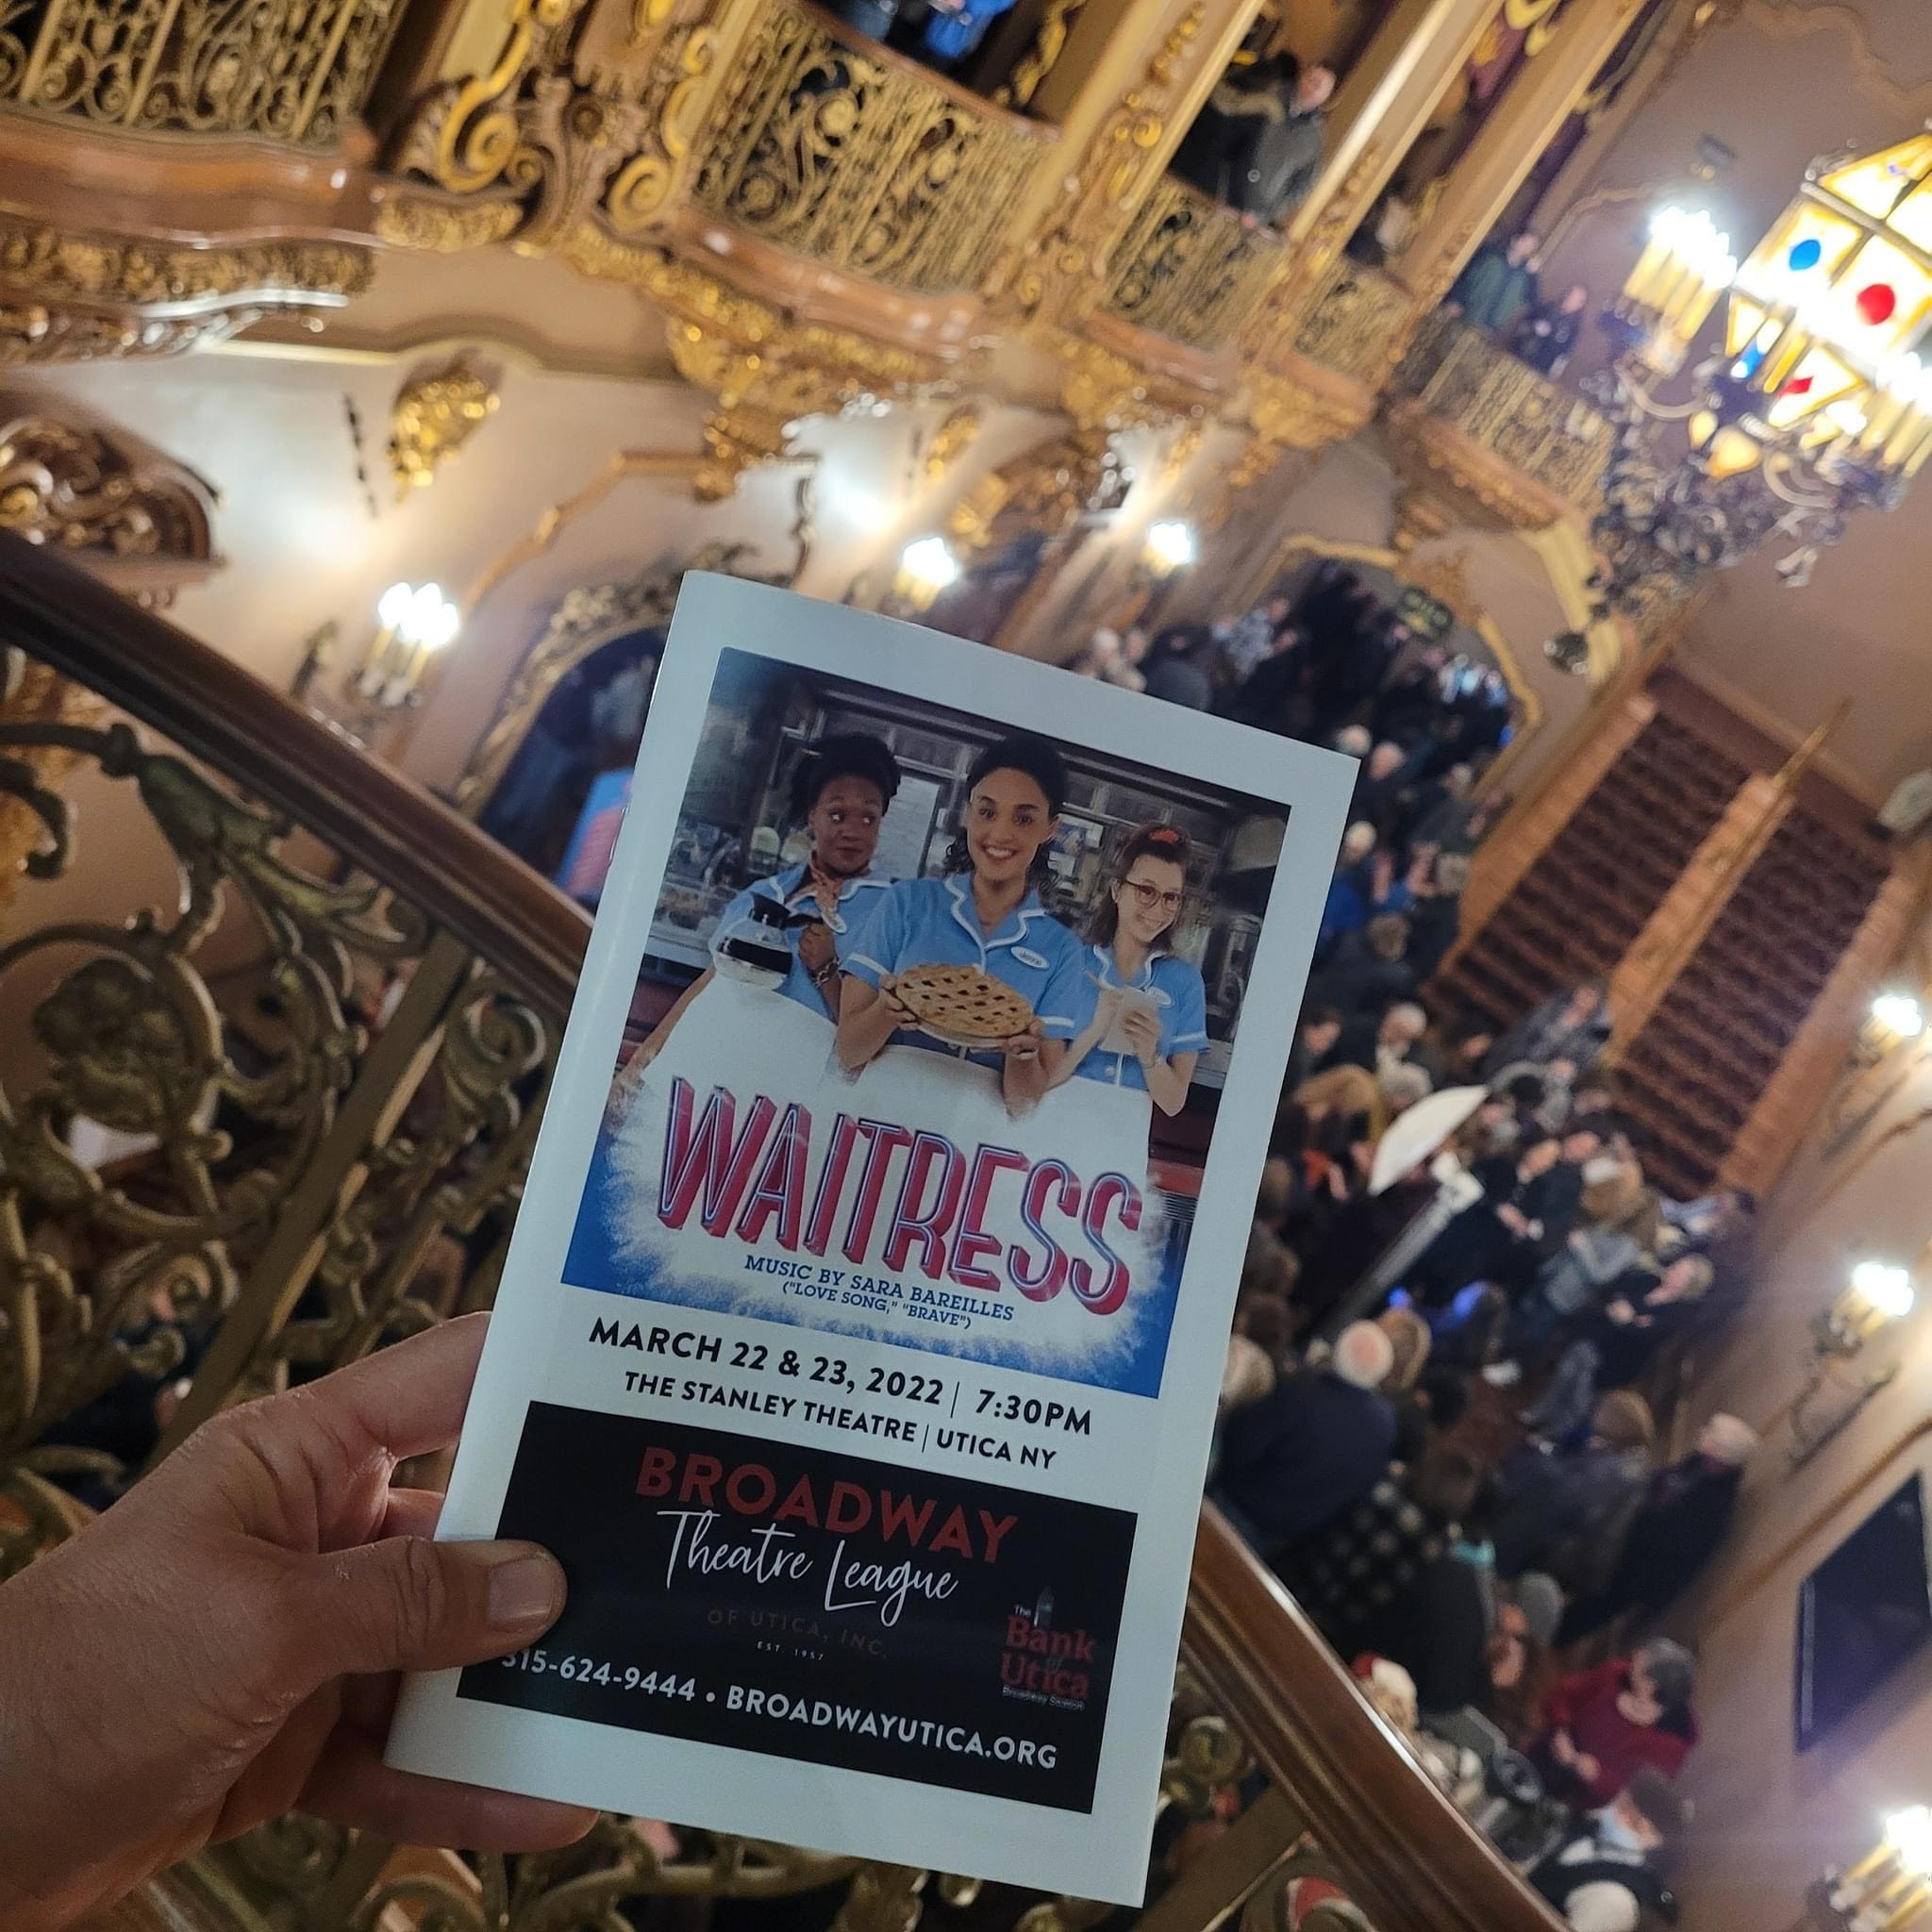 Deliciously Performed, Waitress Gave Central New York Reasons to Savor The Night